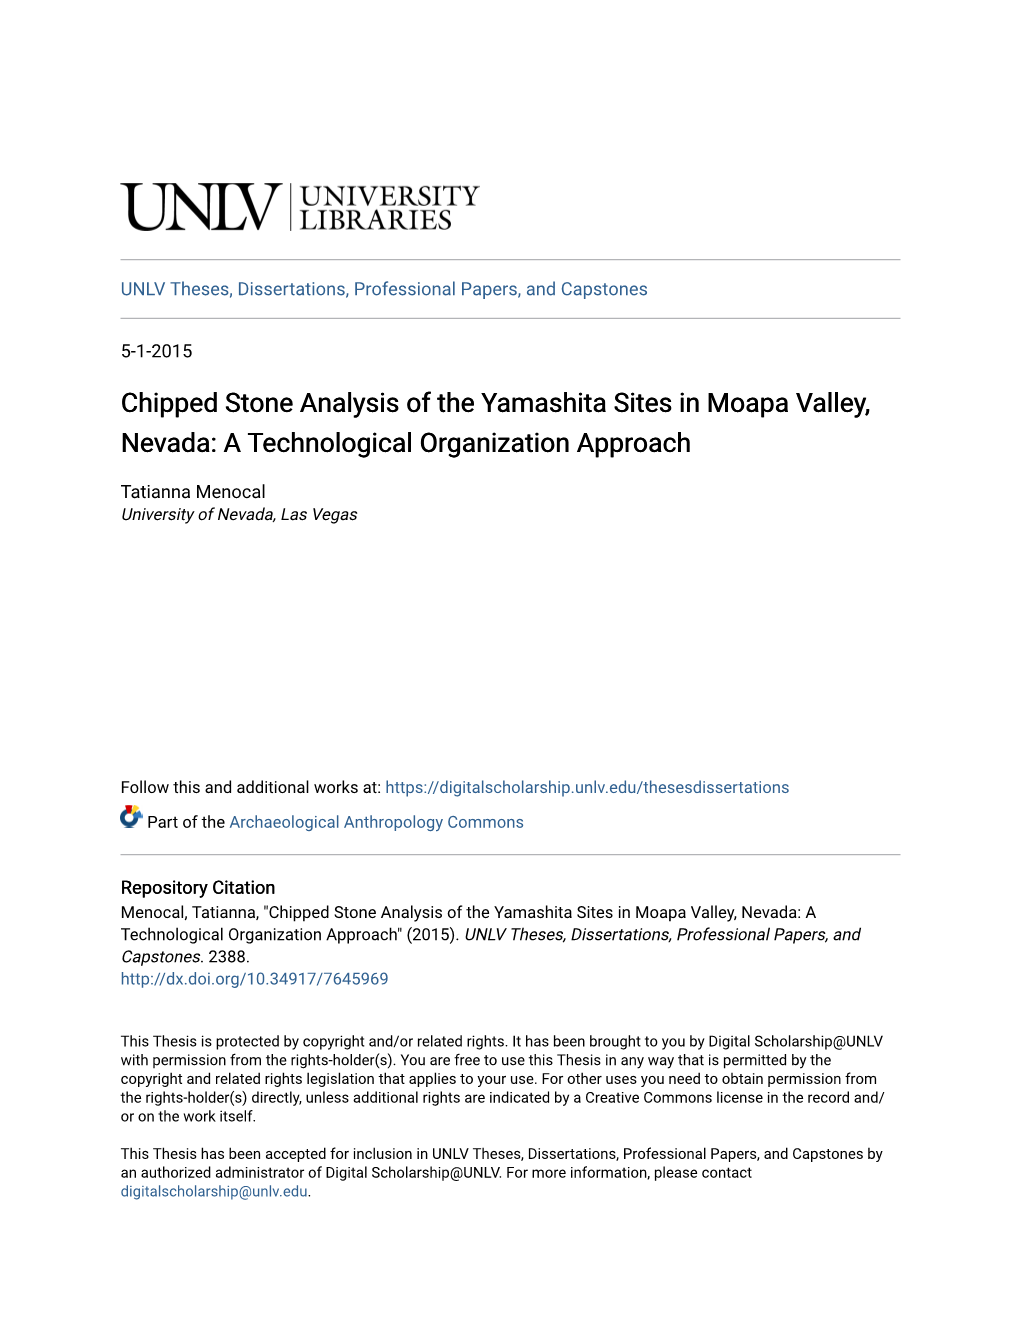 Chipped Stone Analysis of the Yamashita Sites in Moapa Valley, Nevada: a Technological Organization Approach